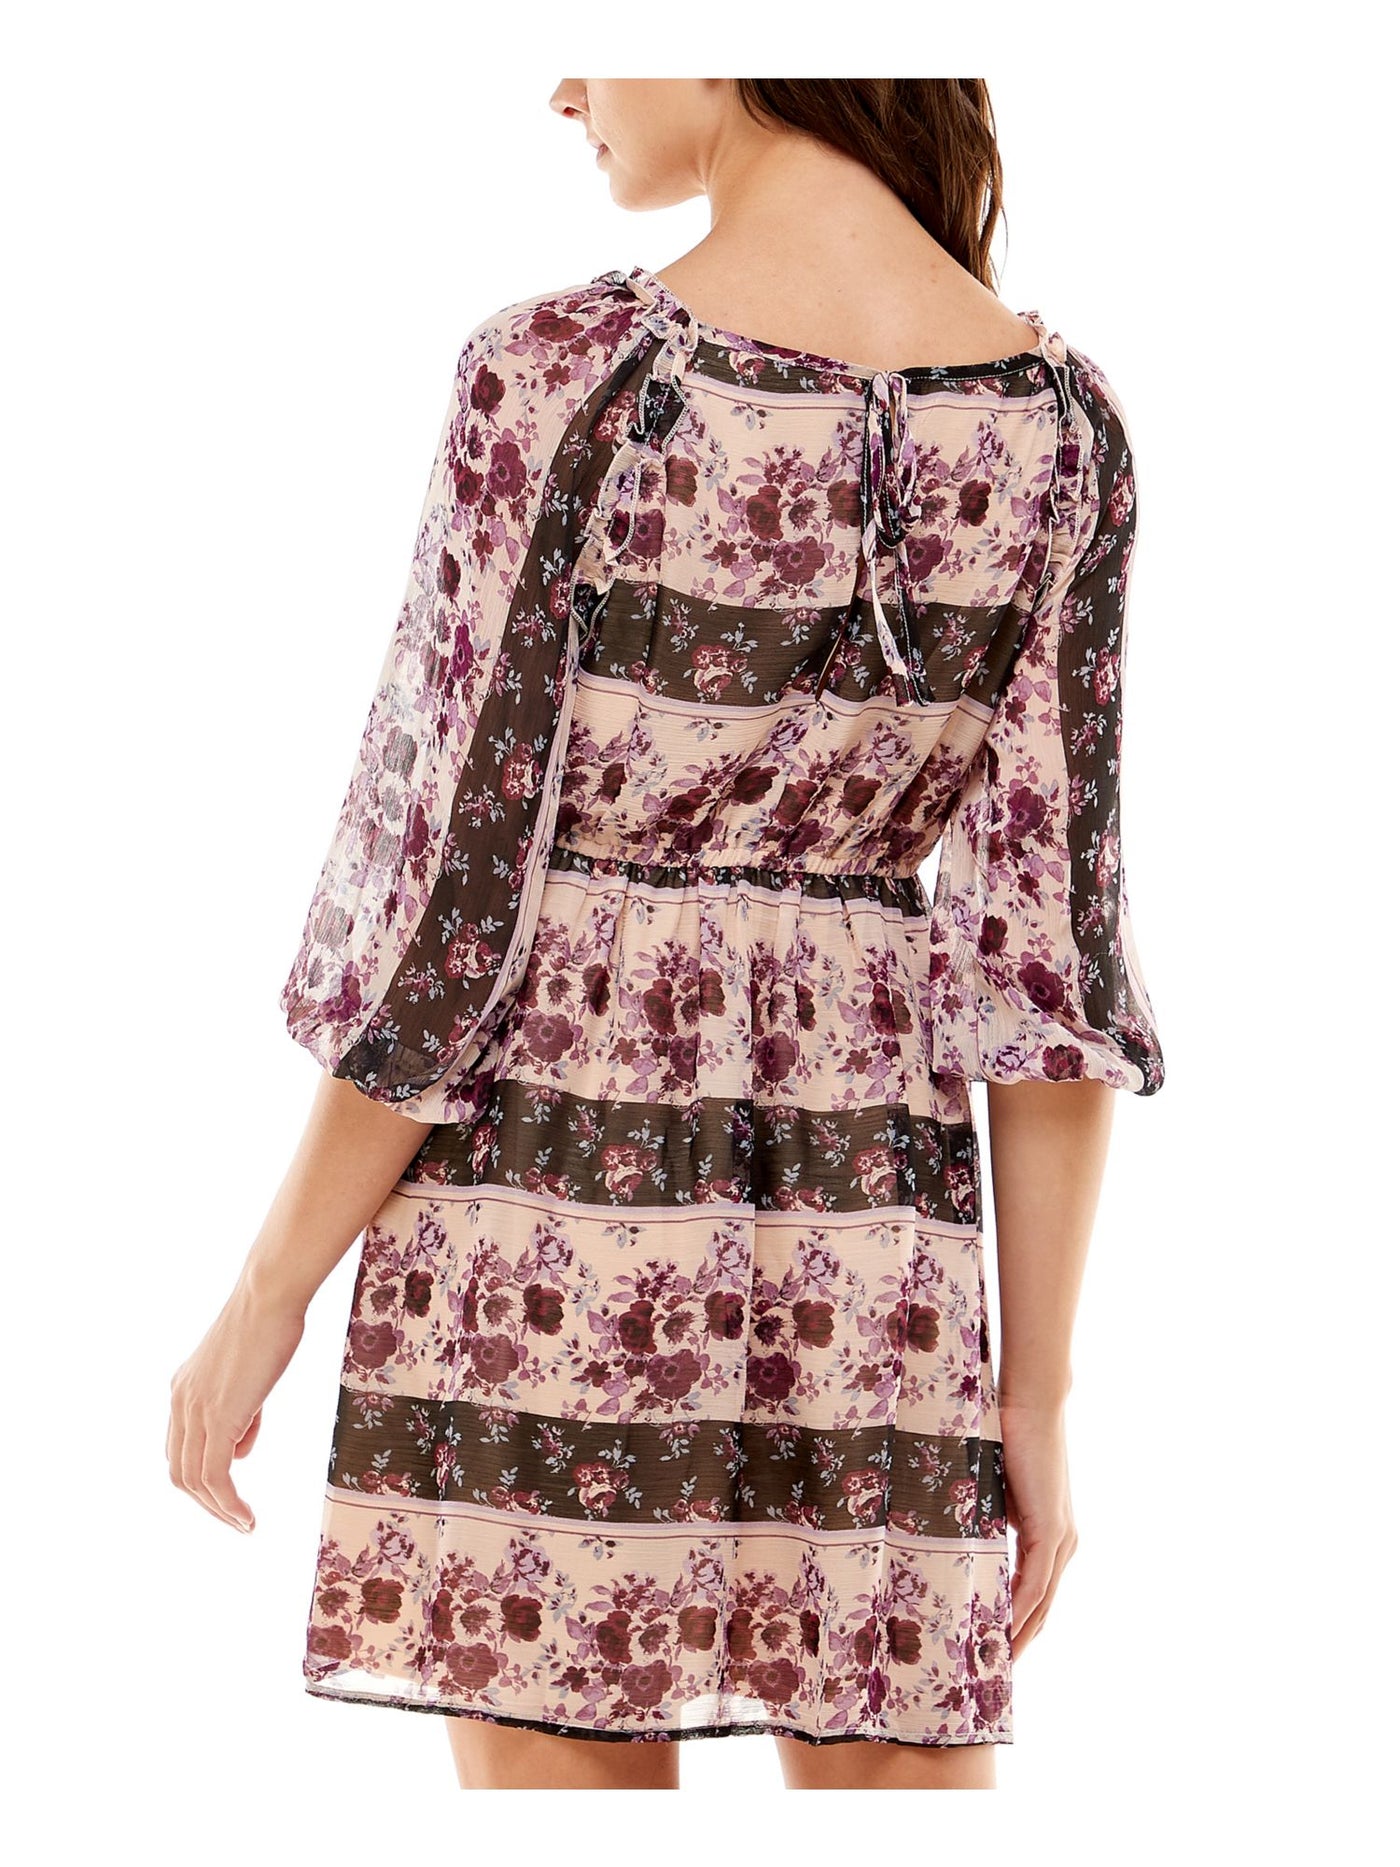 CRYSTAL DOLLS Womens Ruffled Floral 3/4 Sleeve V Neck Above The Knee Cocktail A-Line Dress Juniors